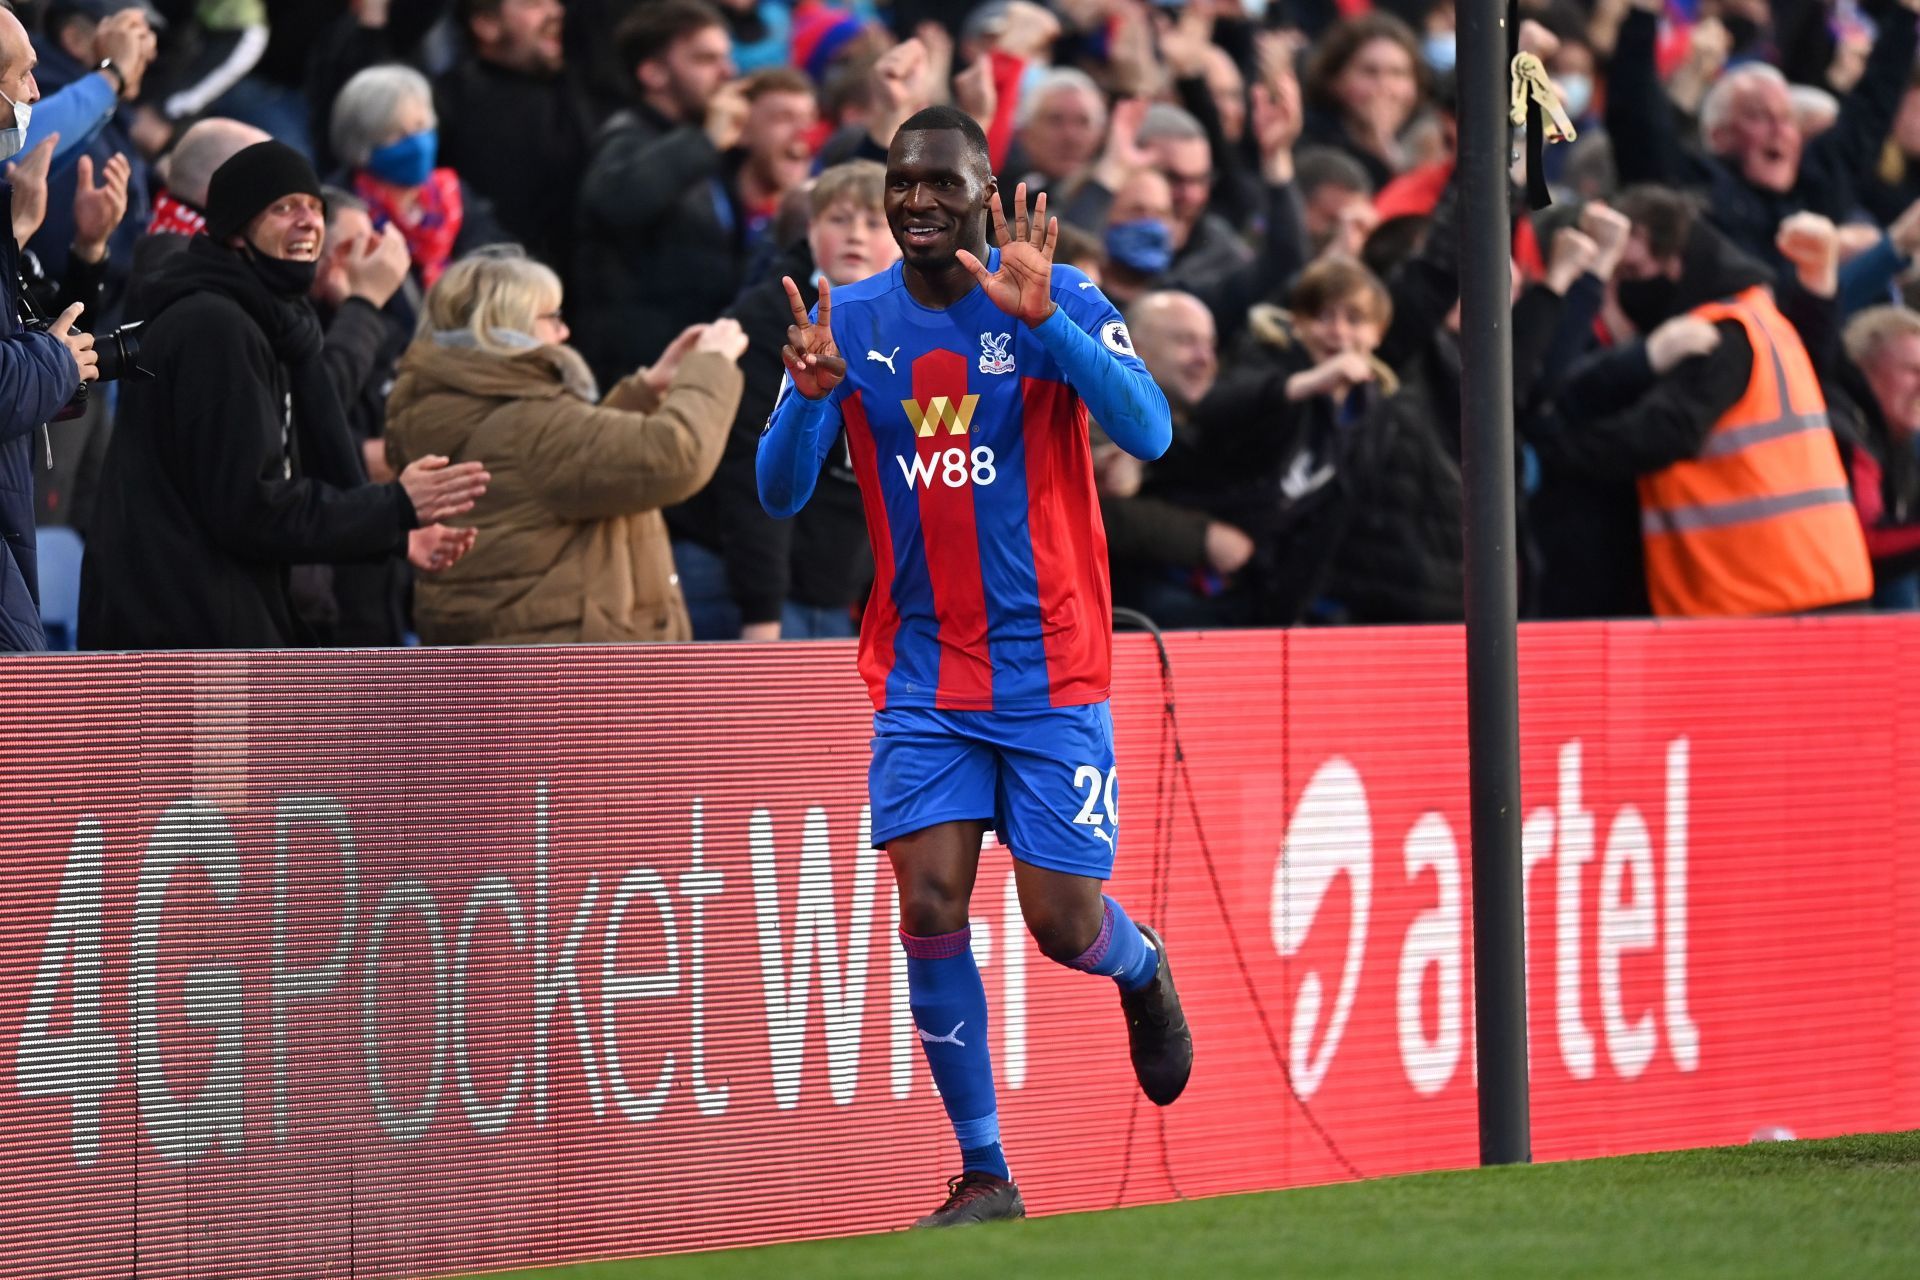 Christian Benteke has struggled for goals in the last few years.